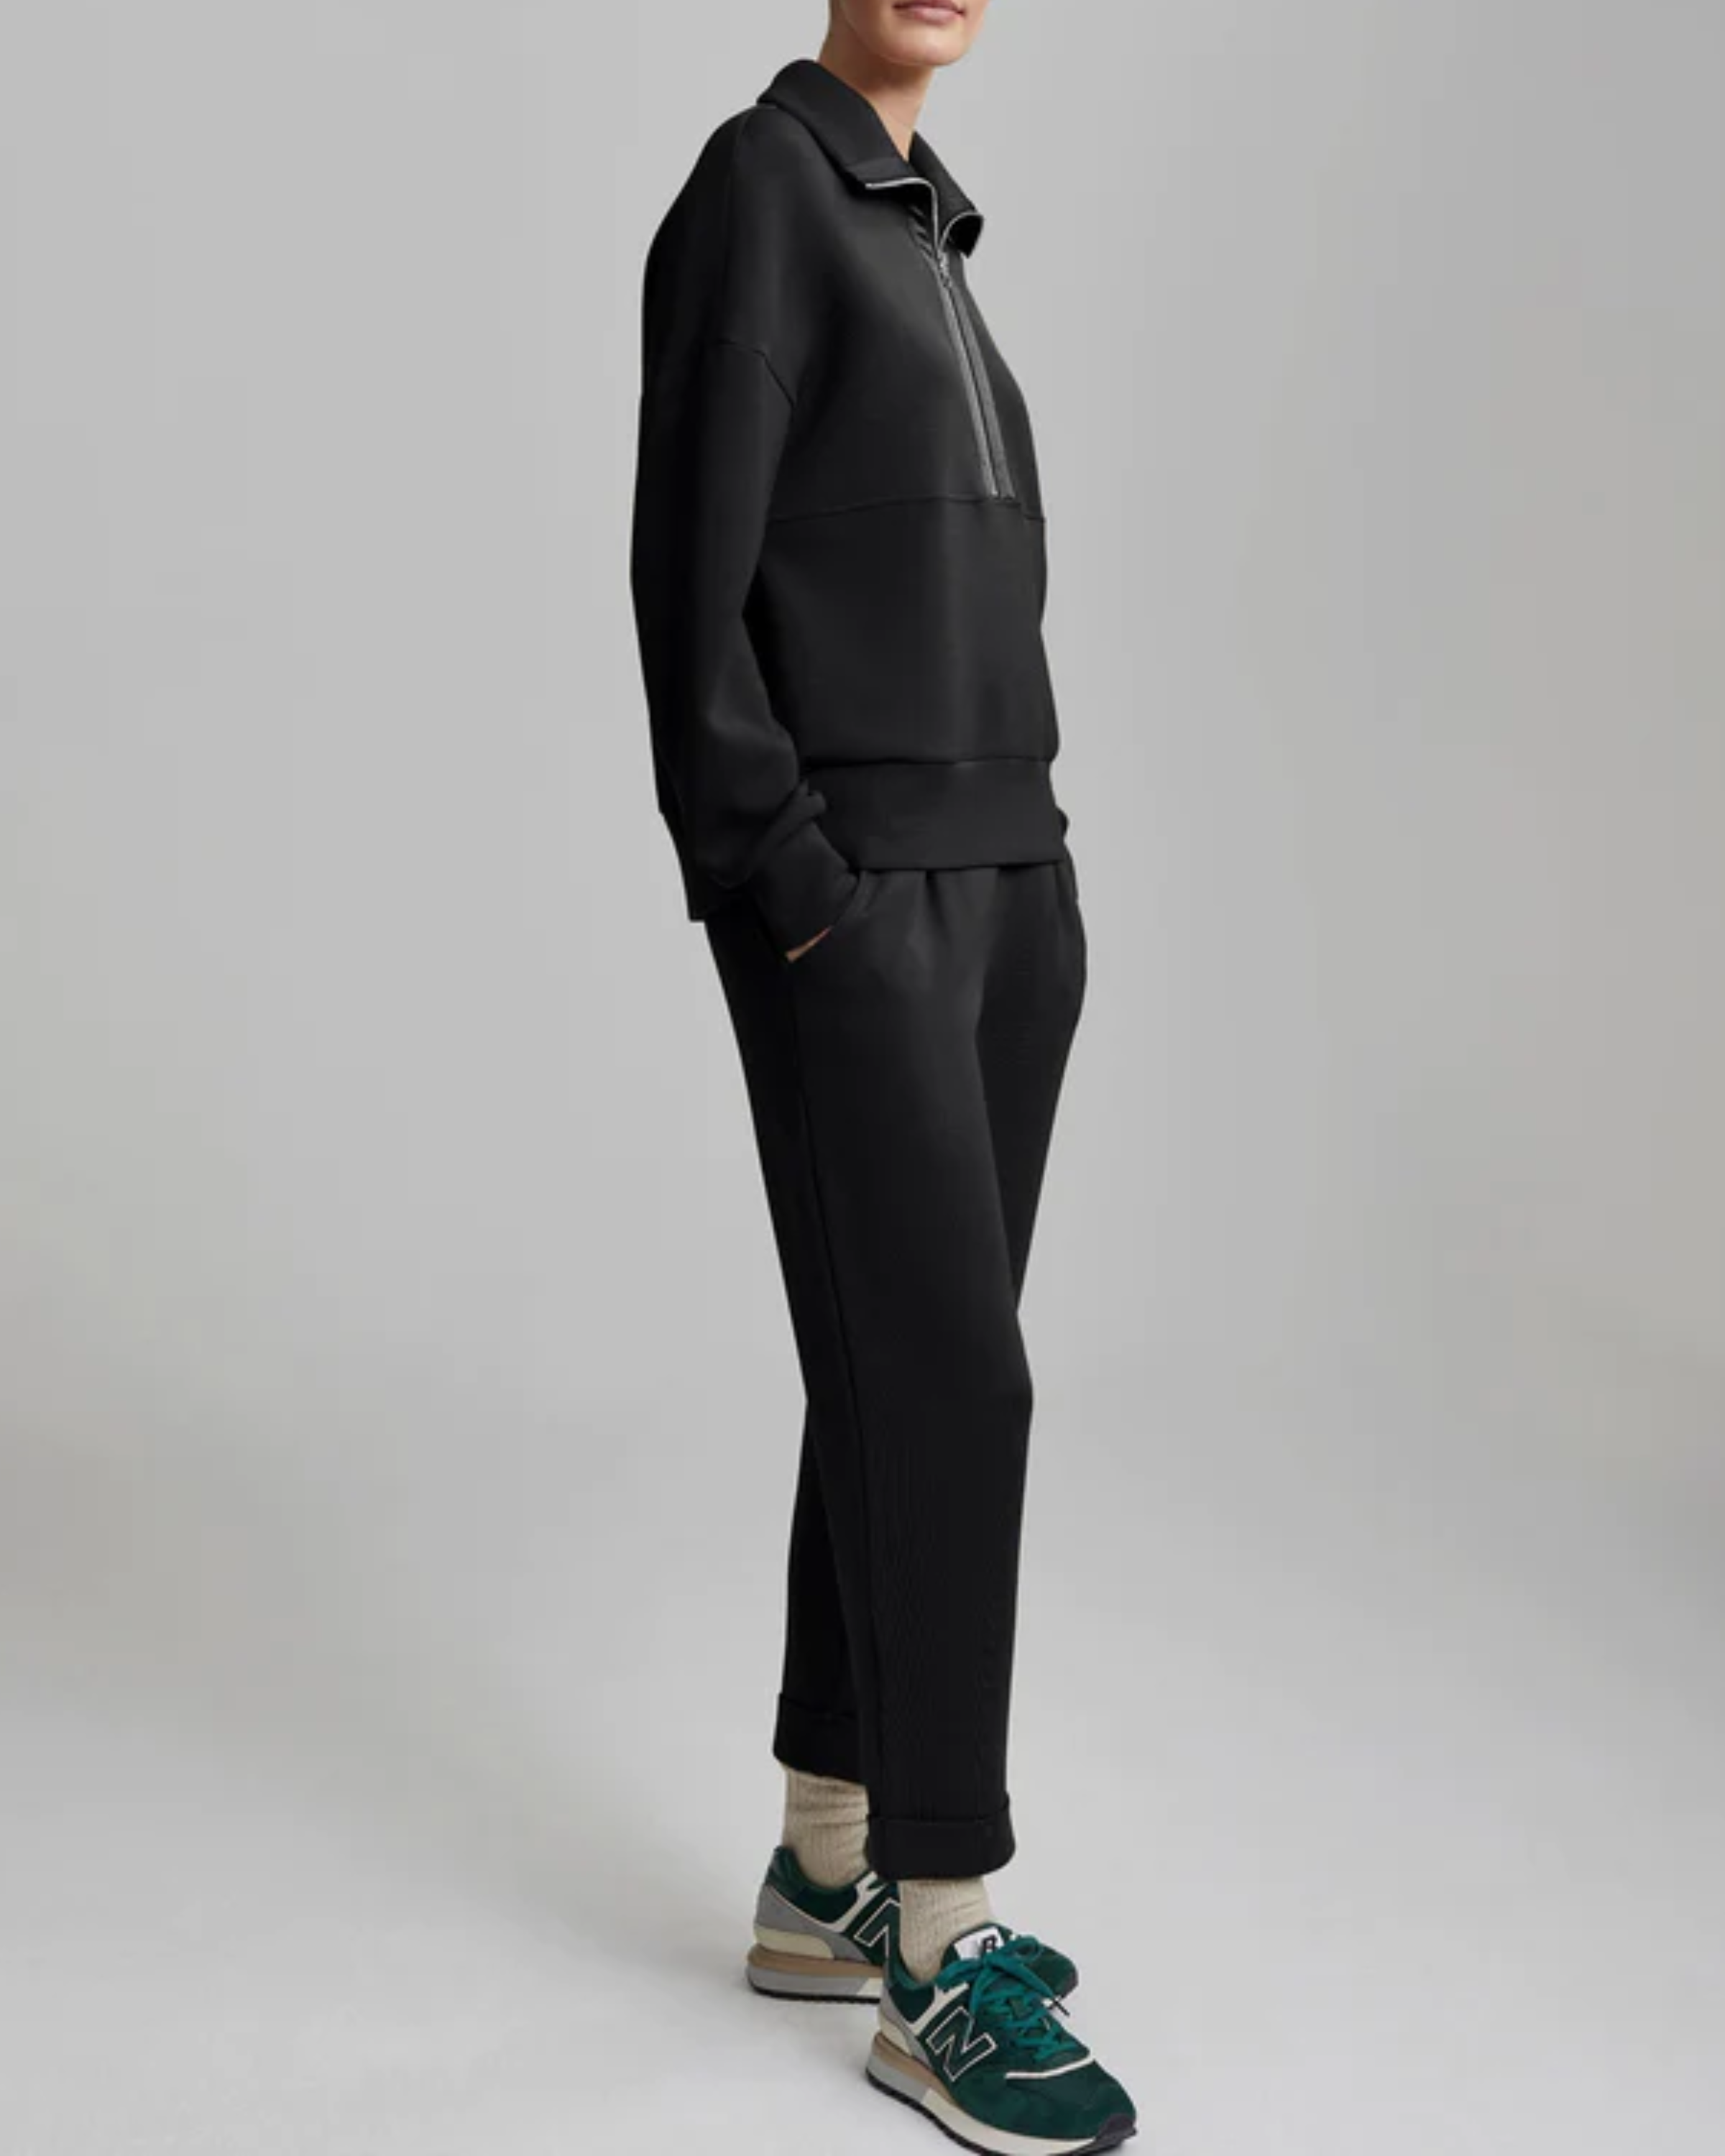 Varley Rolled Cuff Pant in Black